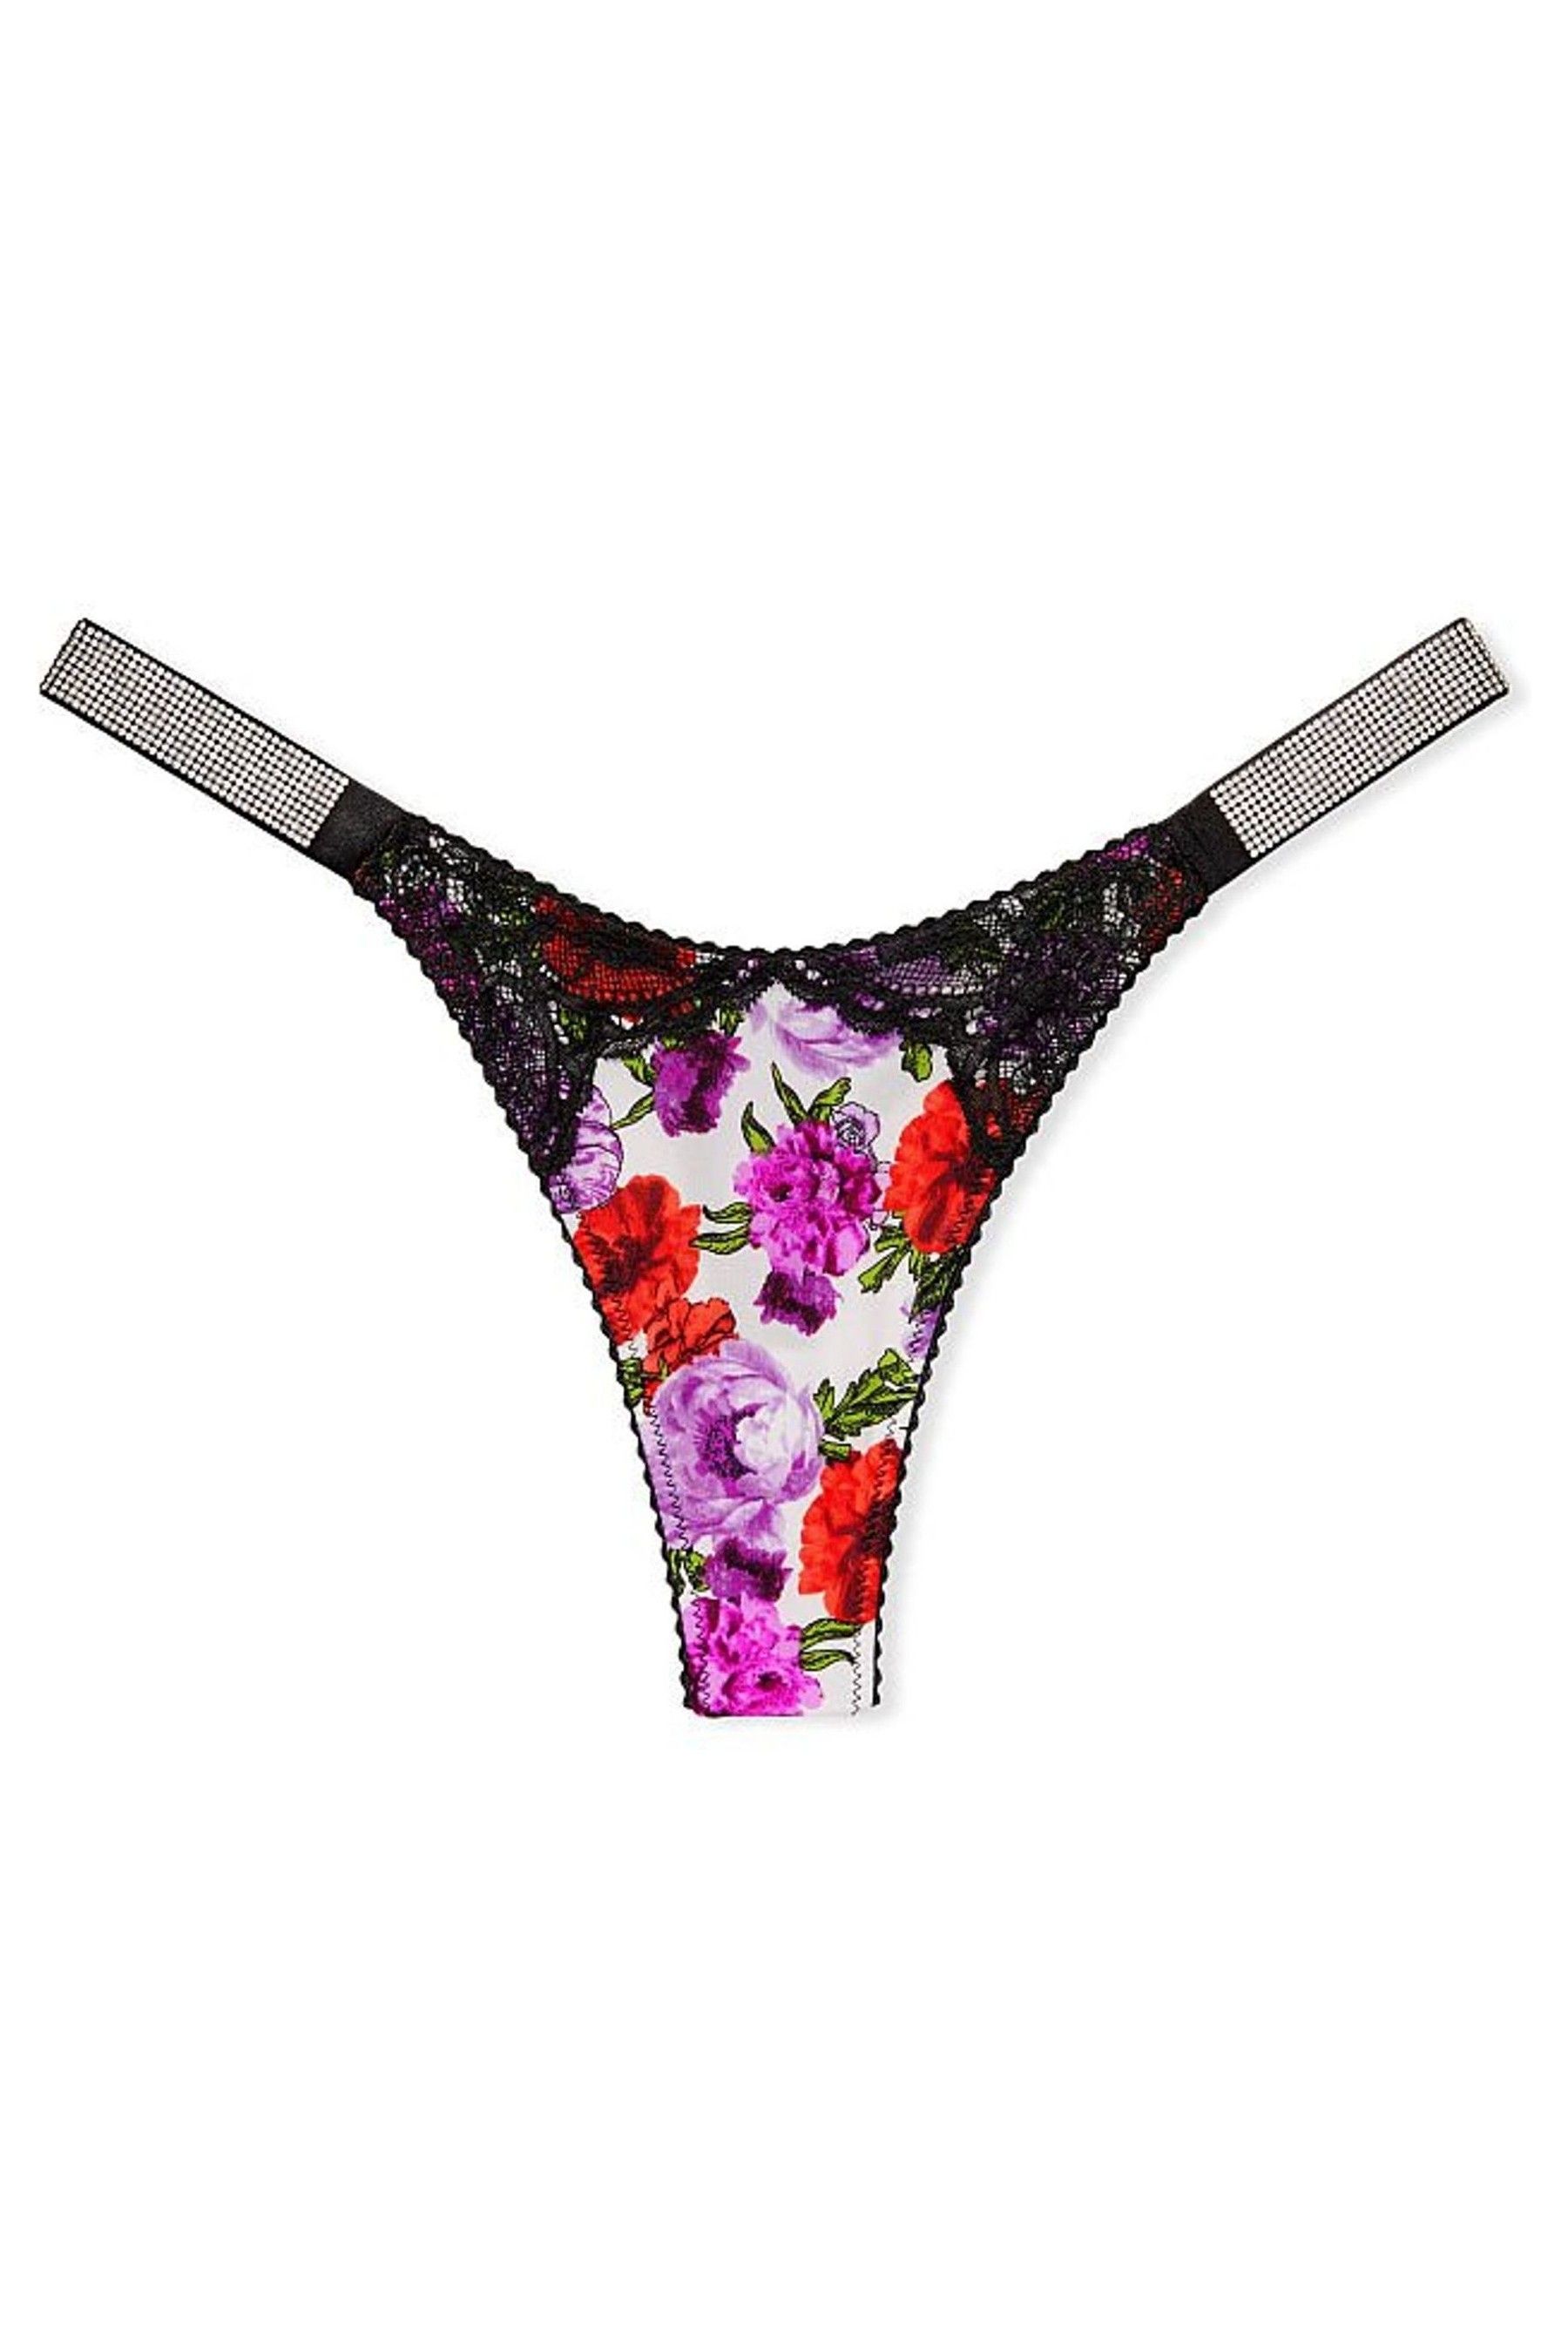 Buy Victoria's Secret Bombshell Shine Strap Thong Panty from the ...